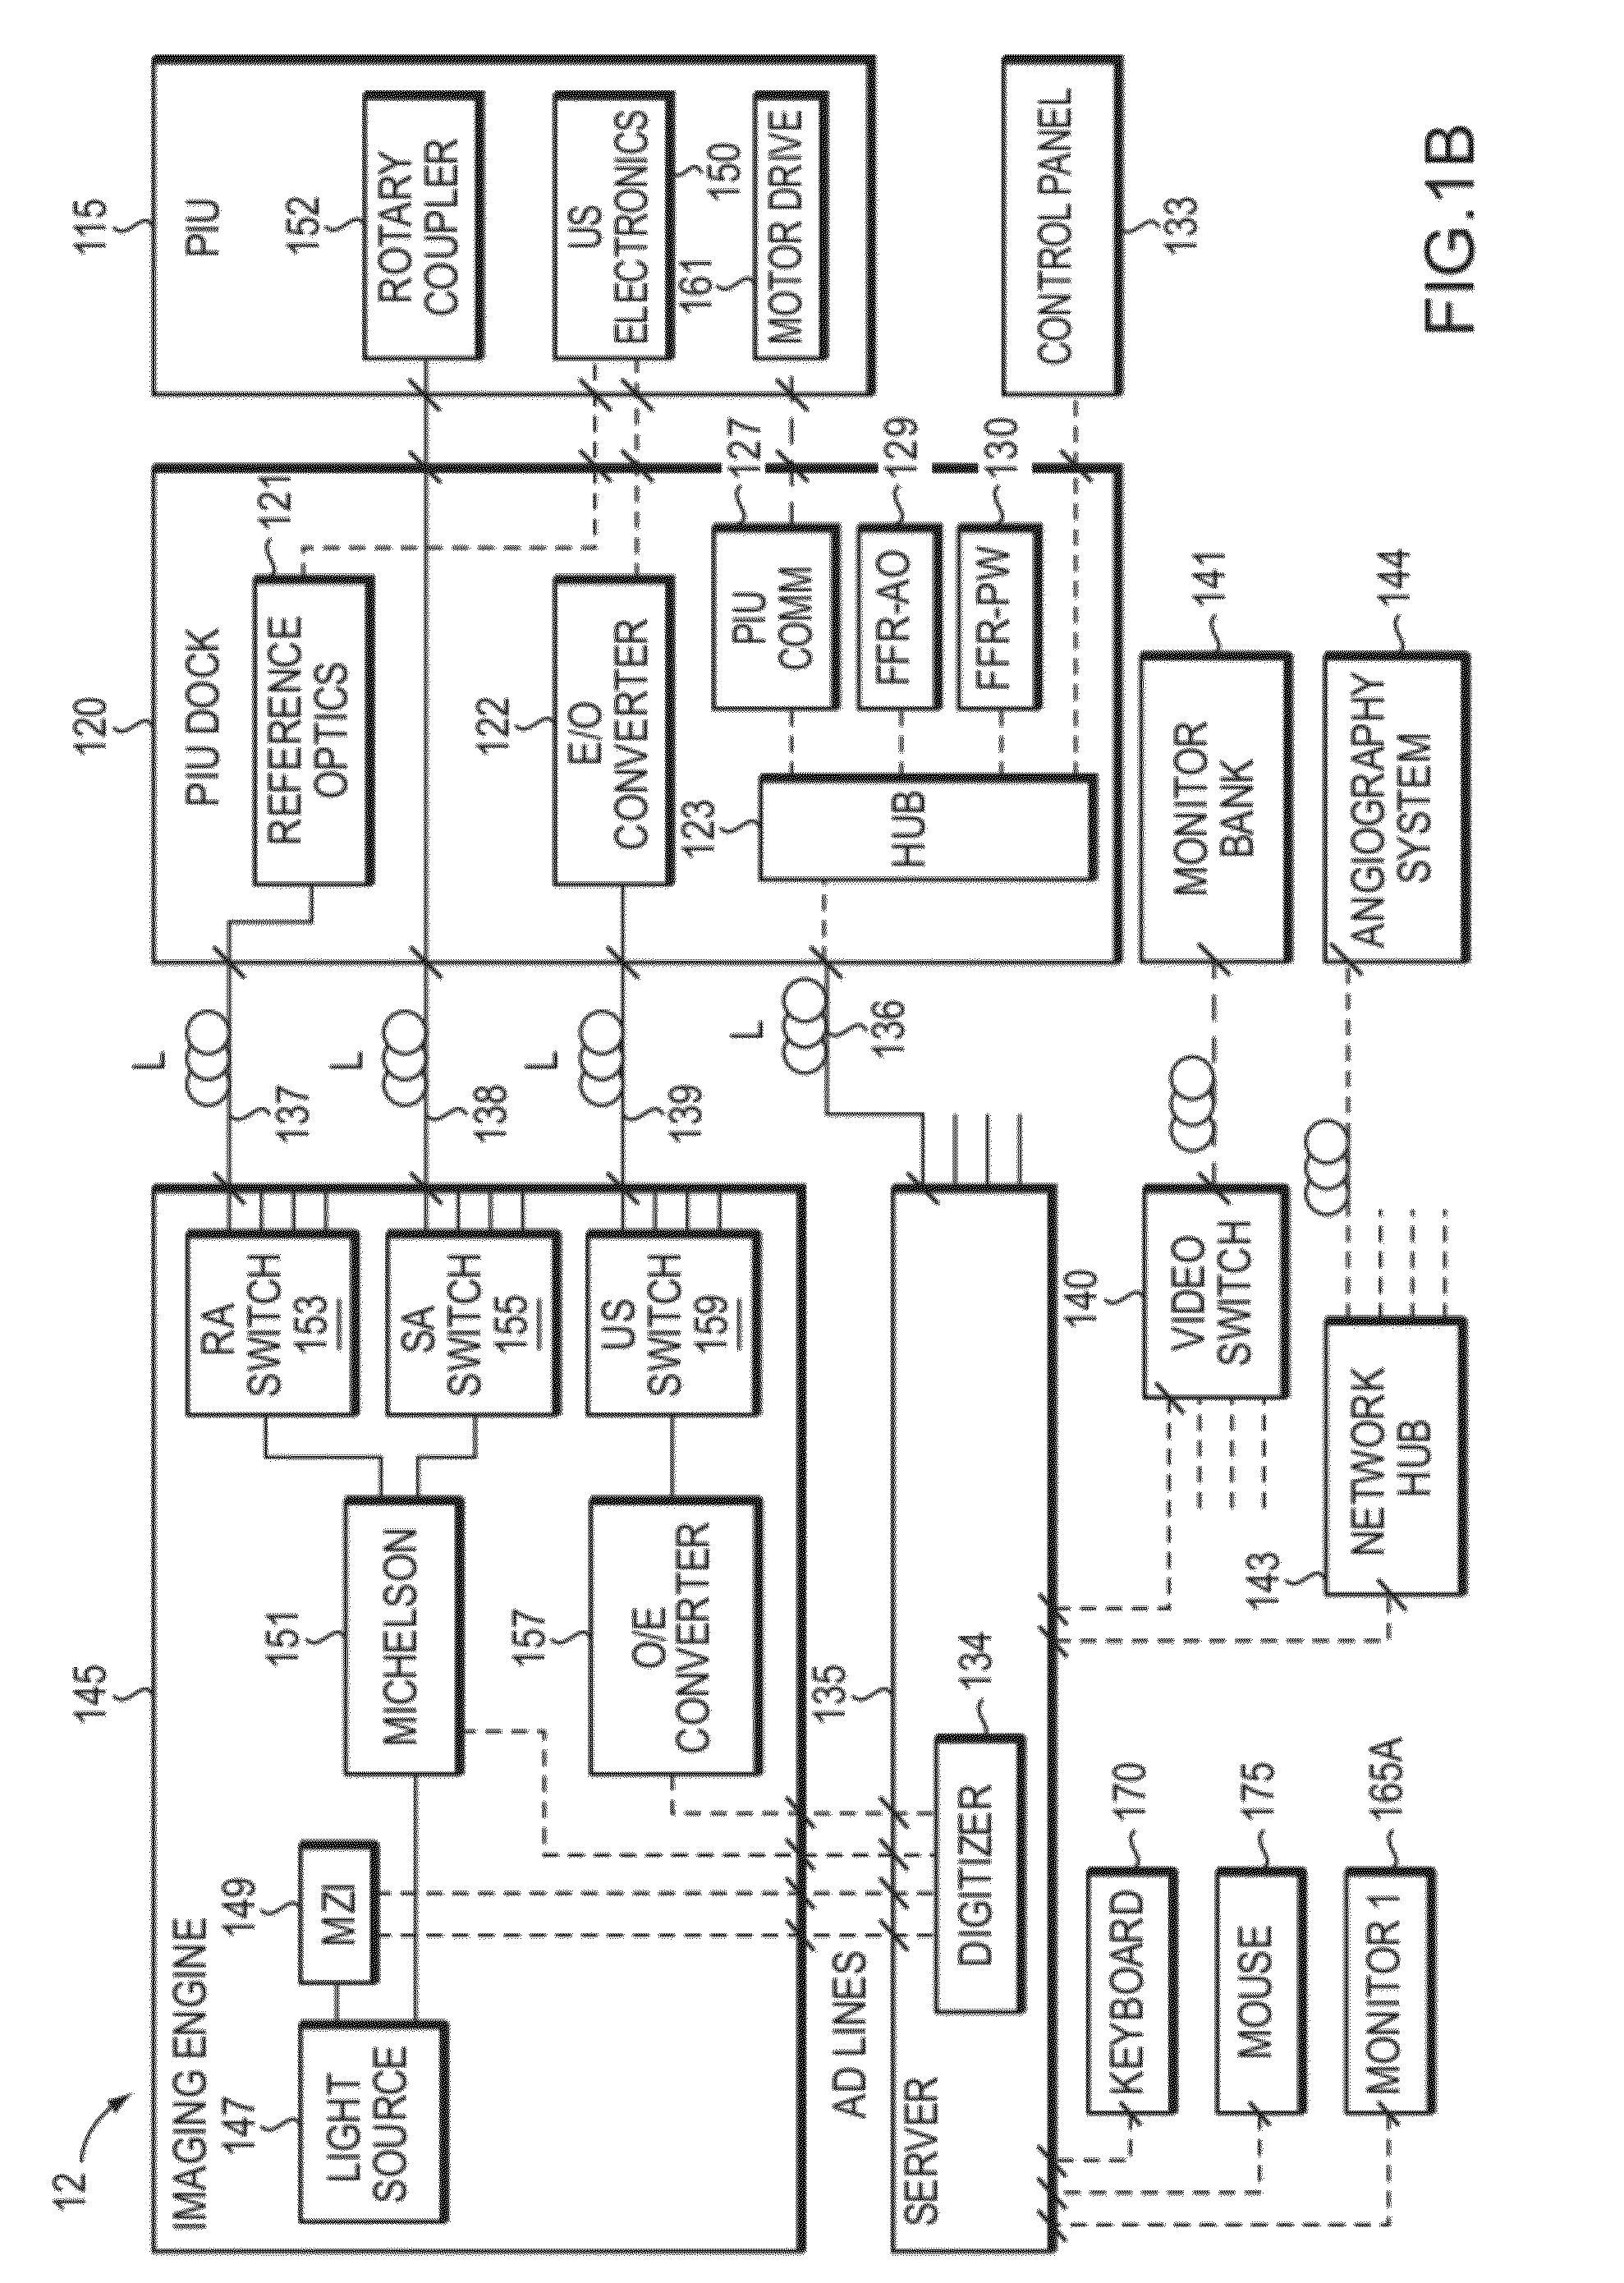 Multimodal Imaging System, Apparatus, and Methods